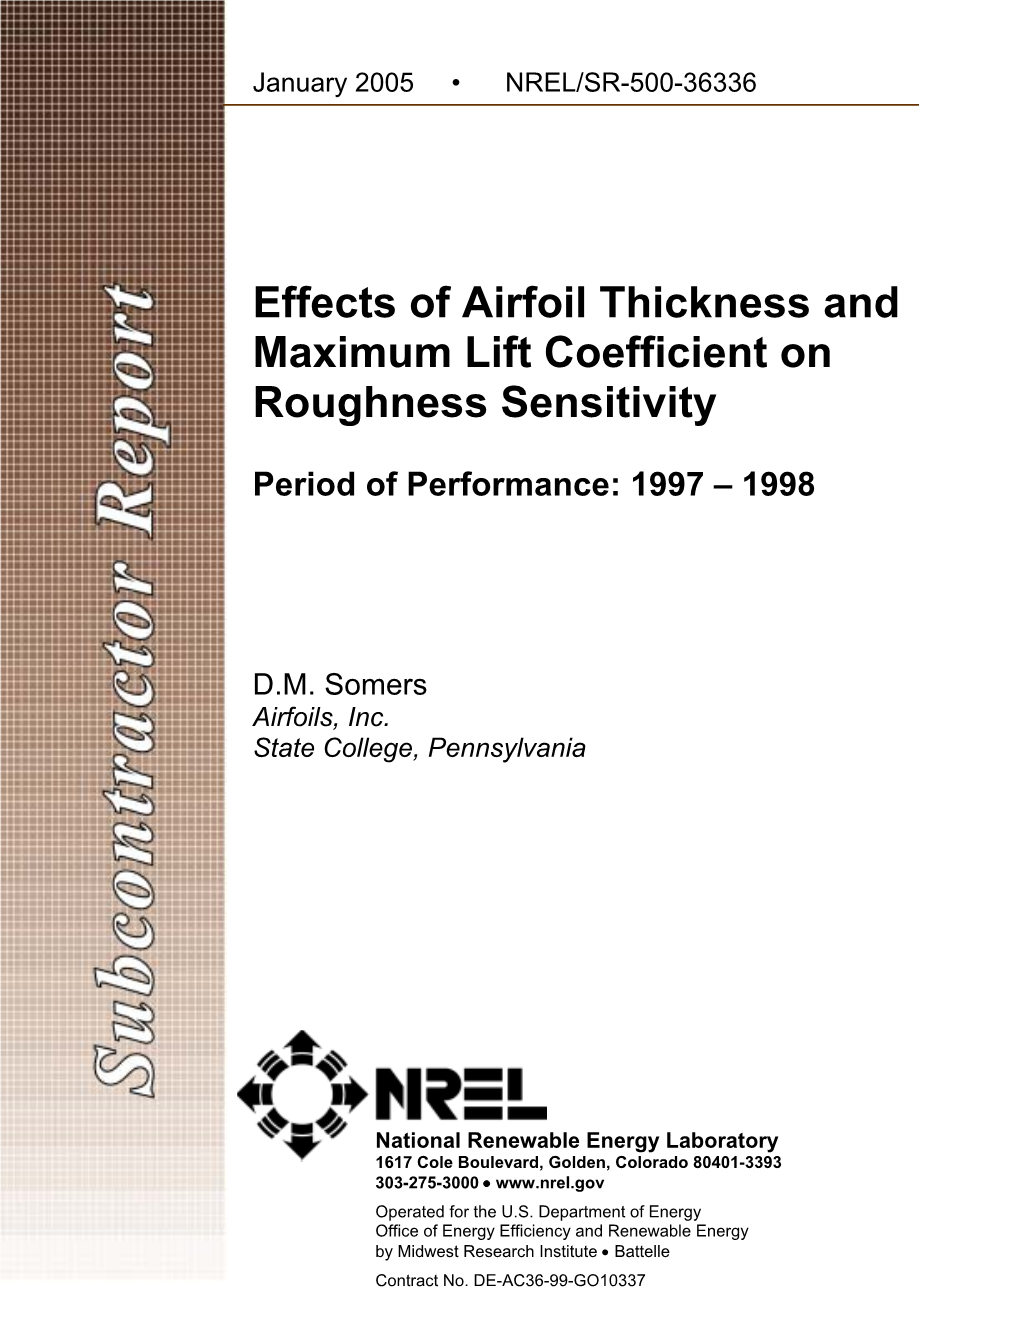 Effects of Airfoil Thickness and Maximum Lift Coefficient on Roughness Sensitivity